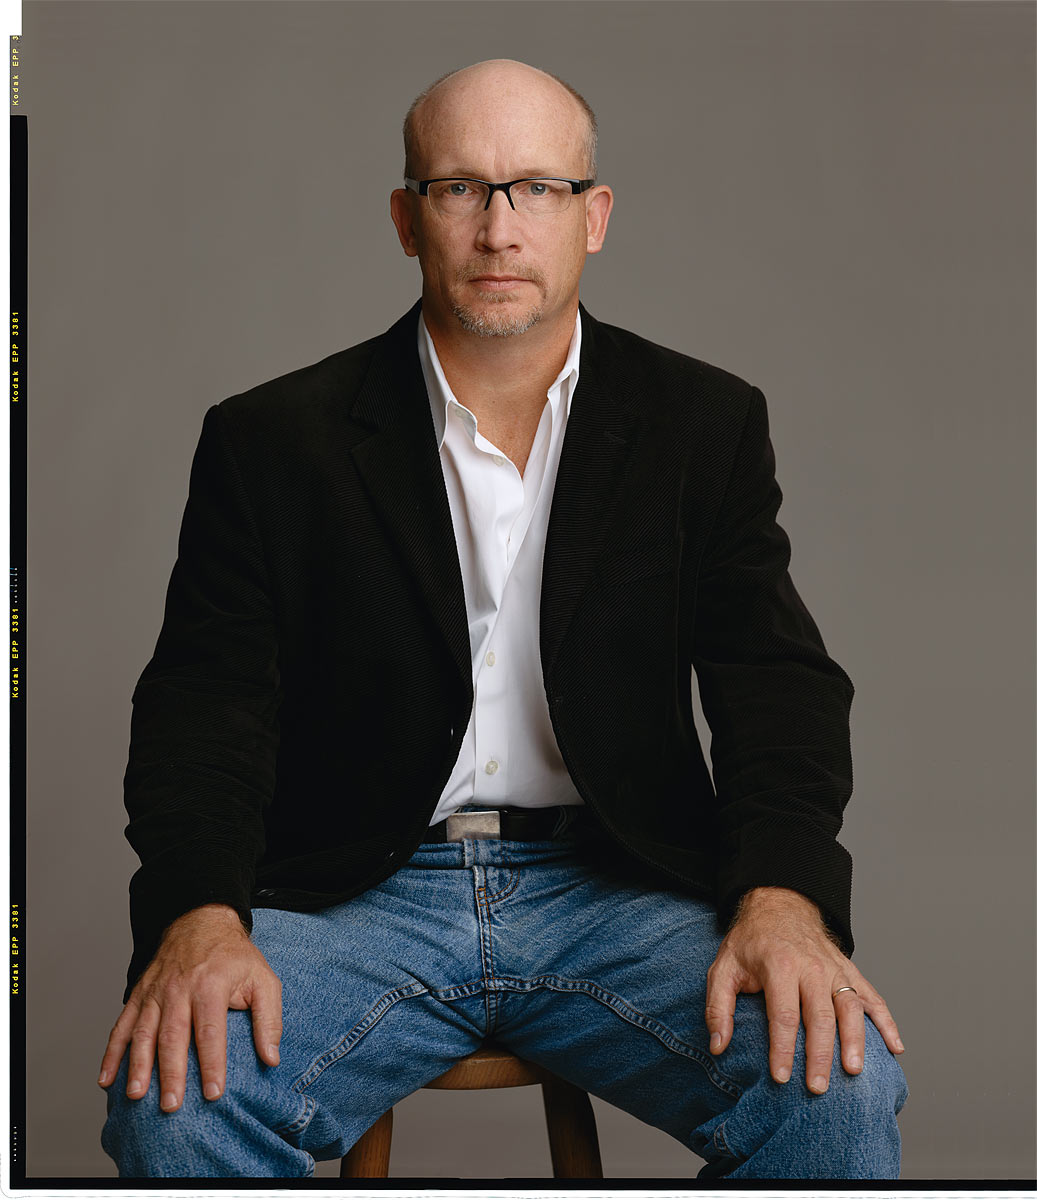 Alex Gibney, director of Client 9: The Rise and Fall of Eliot Spitzer. Photo courtesy of Magnolia Pictures.